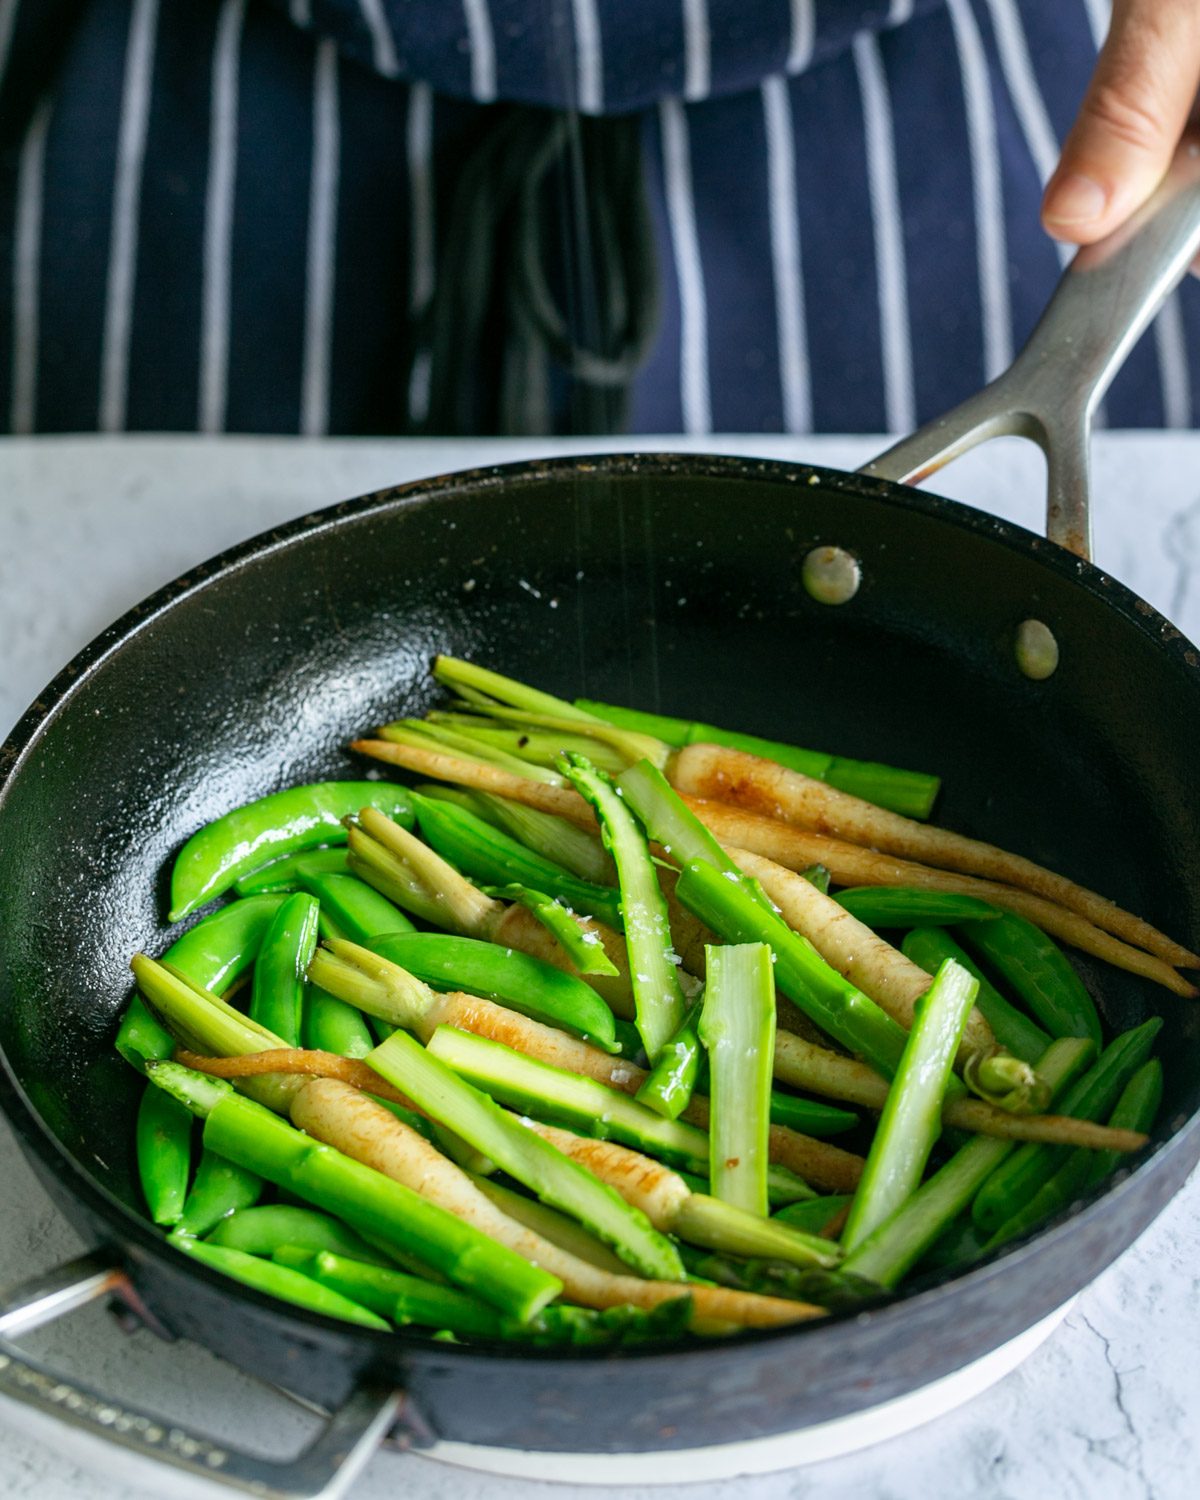 Pan roast blanched peas and asparagus